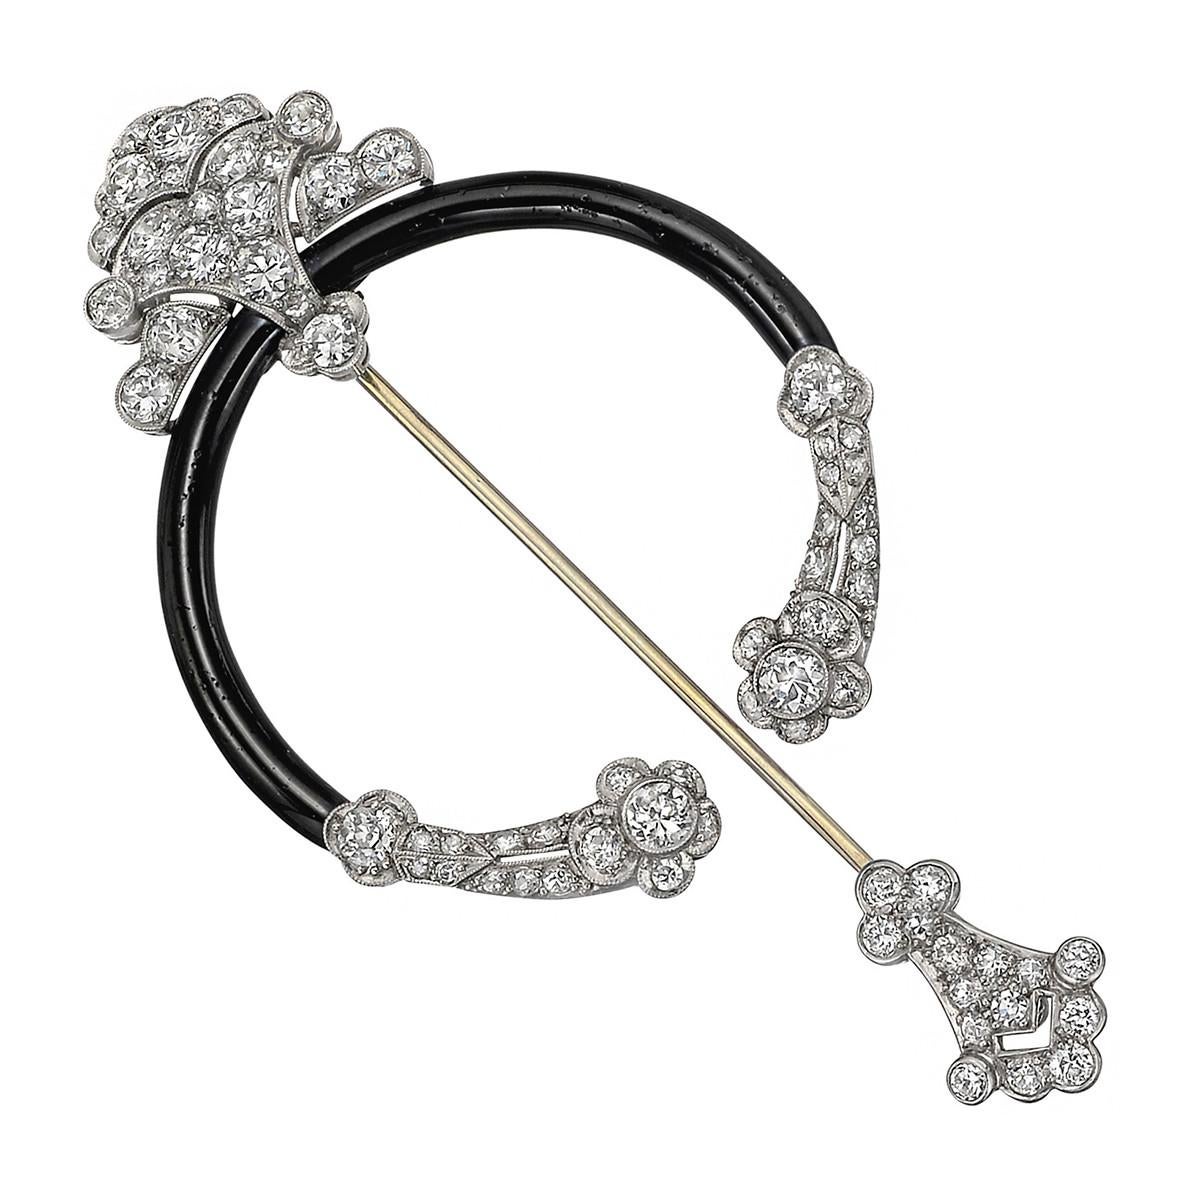 Fibula brooch, featuring old mine-cut diamonds highlighted by black enamel, set in platinum.

70 diamonds weighing ~3.27 total carats
Gold pin stem
3.05